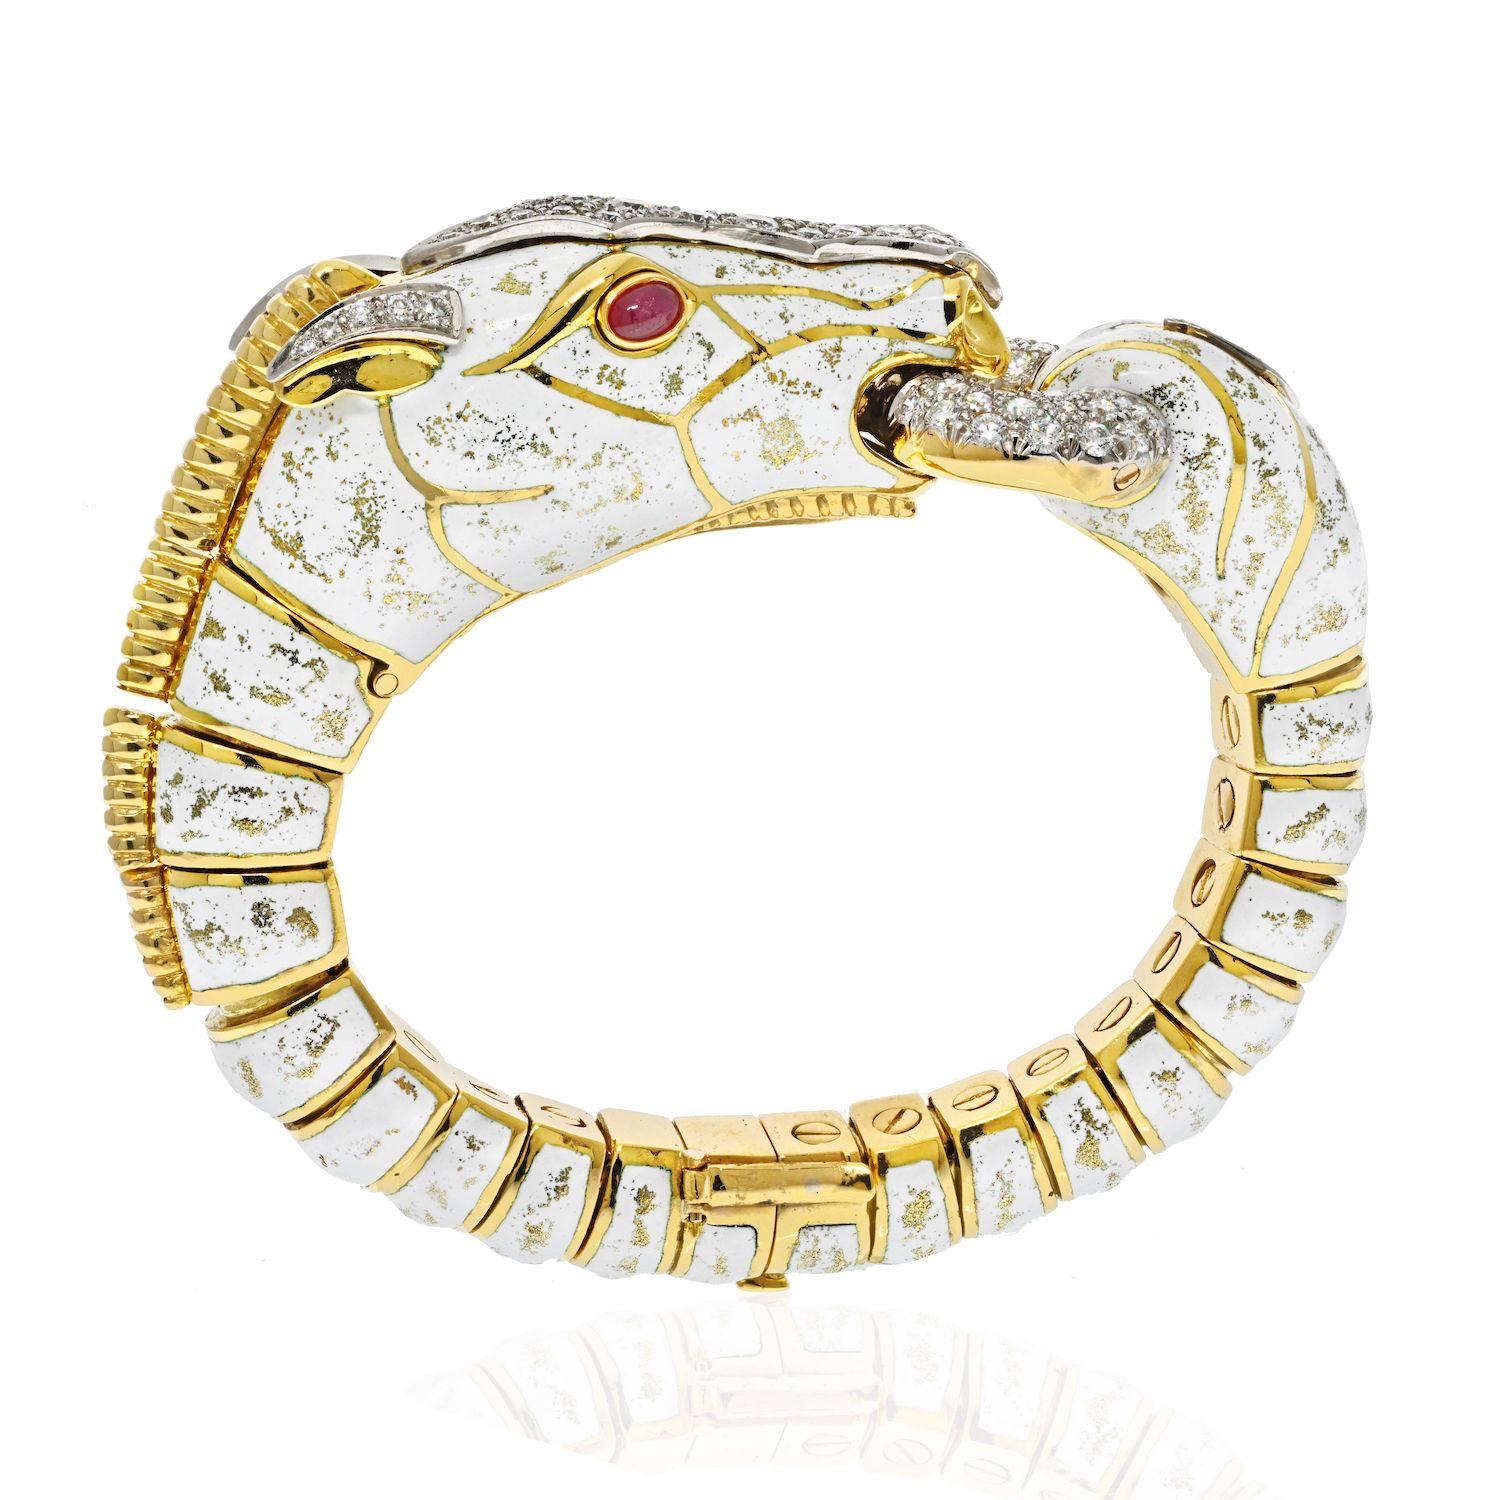 Delight in the equestrian elegance of this David Webb Platinum & 18K Yellow Gold Dappled White Enamel Diamond Horse Bracelet. Created as part of the Animal Kingdom collection by David Webb, this bracelet is not just a piece of jewelry; it's a work